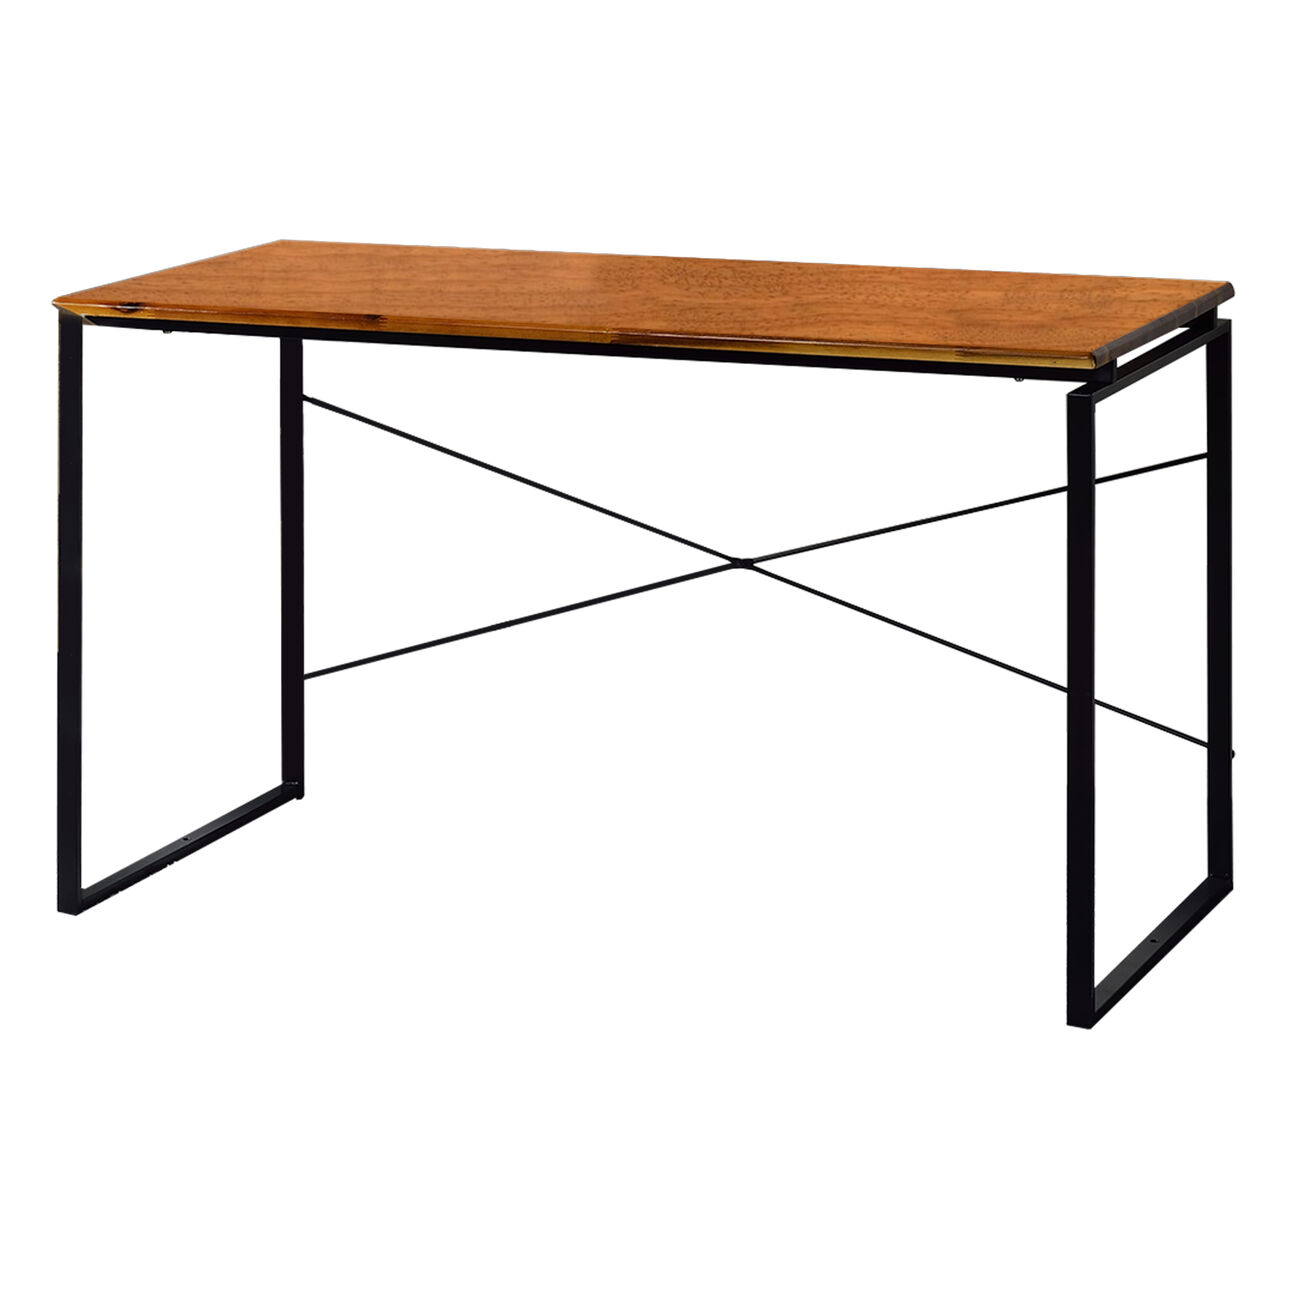 Sled Base Rectangular Table with X shape Back and Wood Top, Brown and Black